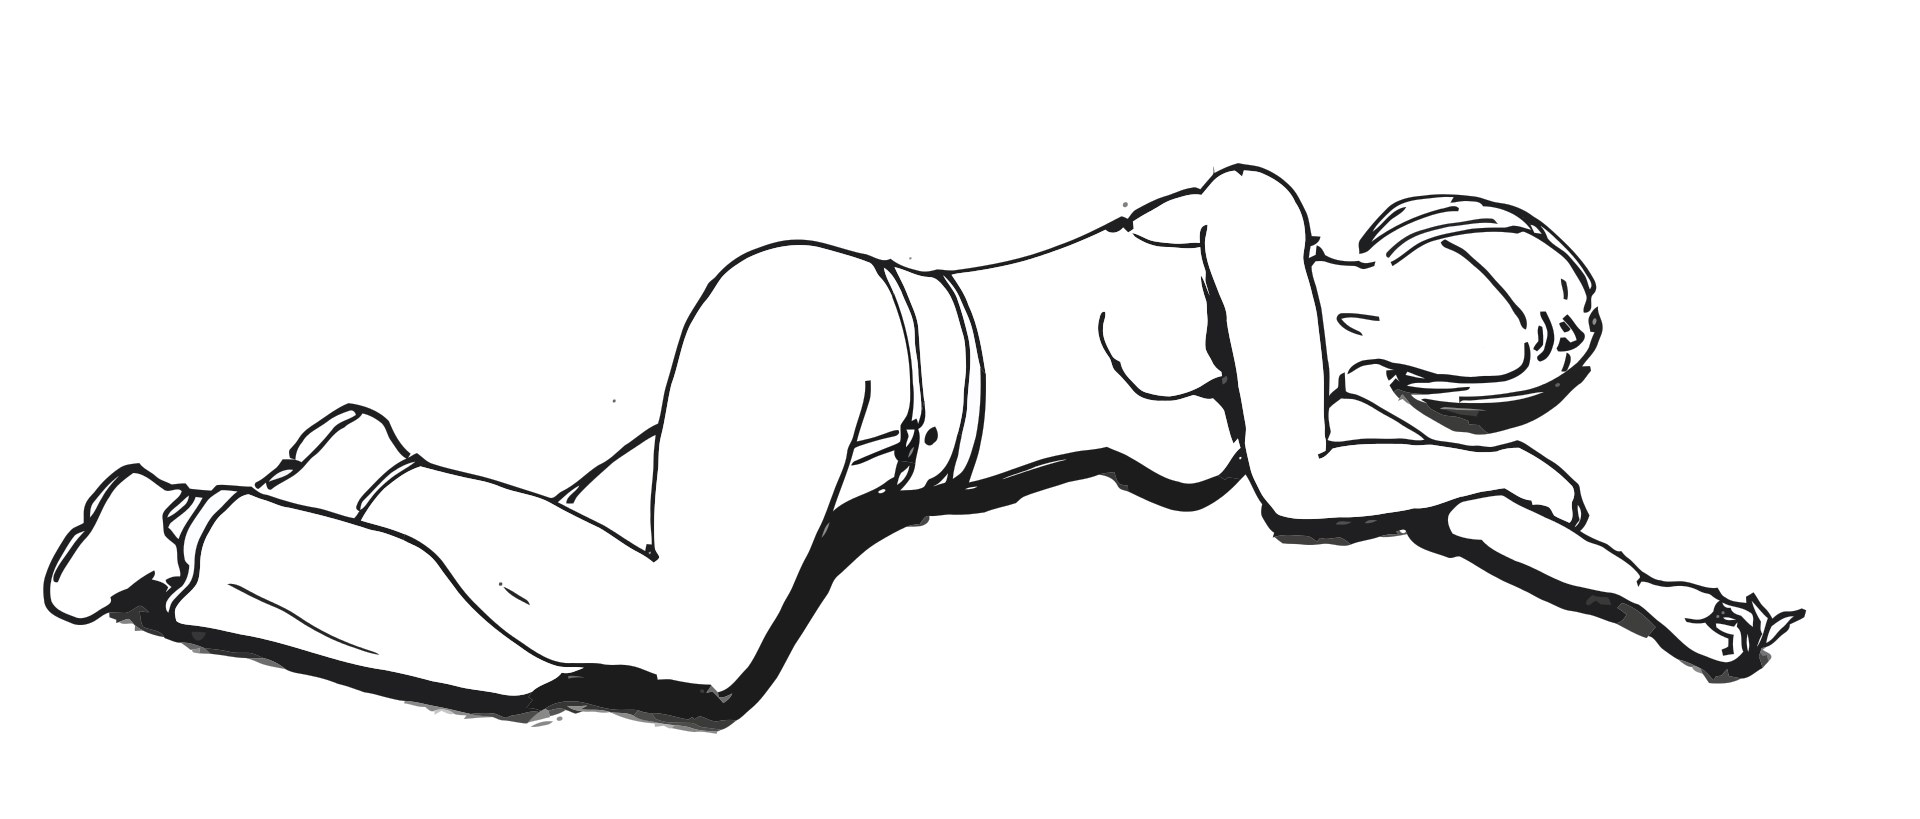 Recovery position - Wikipedia.